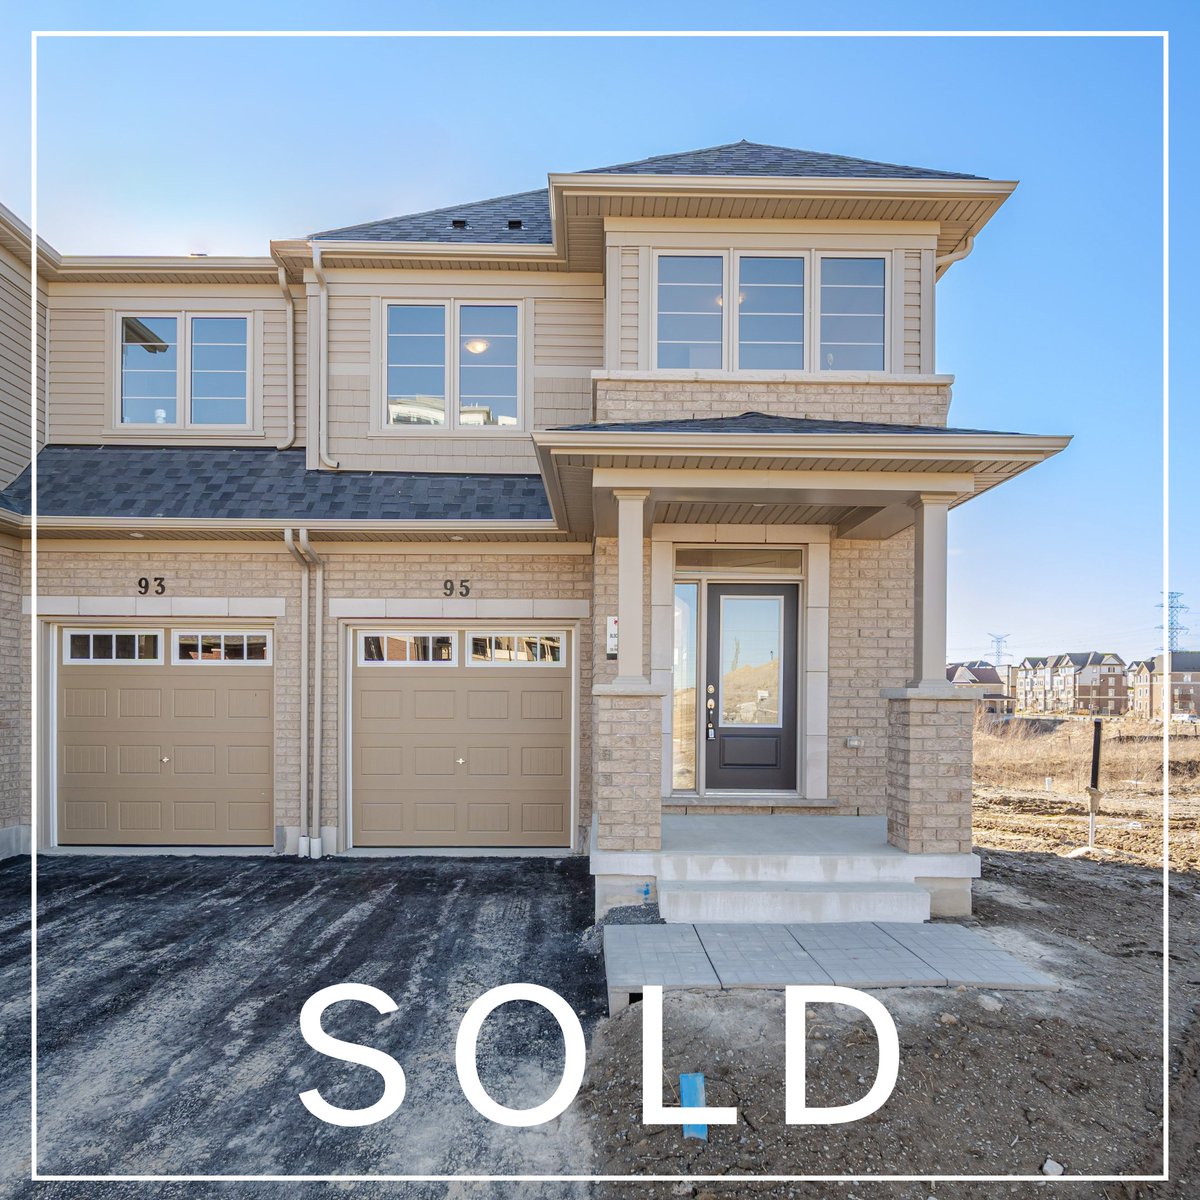 After one offer I got my client's property sold! 🔥

#remax #petercerrito #house #realtor #home #durham #brooklin #durhamregion #oshawa #sell #realestate #bowmanville #ajax #pickering #whitby #toronto #investment #ontario #canada #newhome #realestateagent #tributecommunities